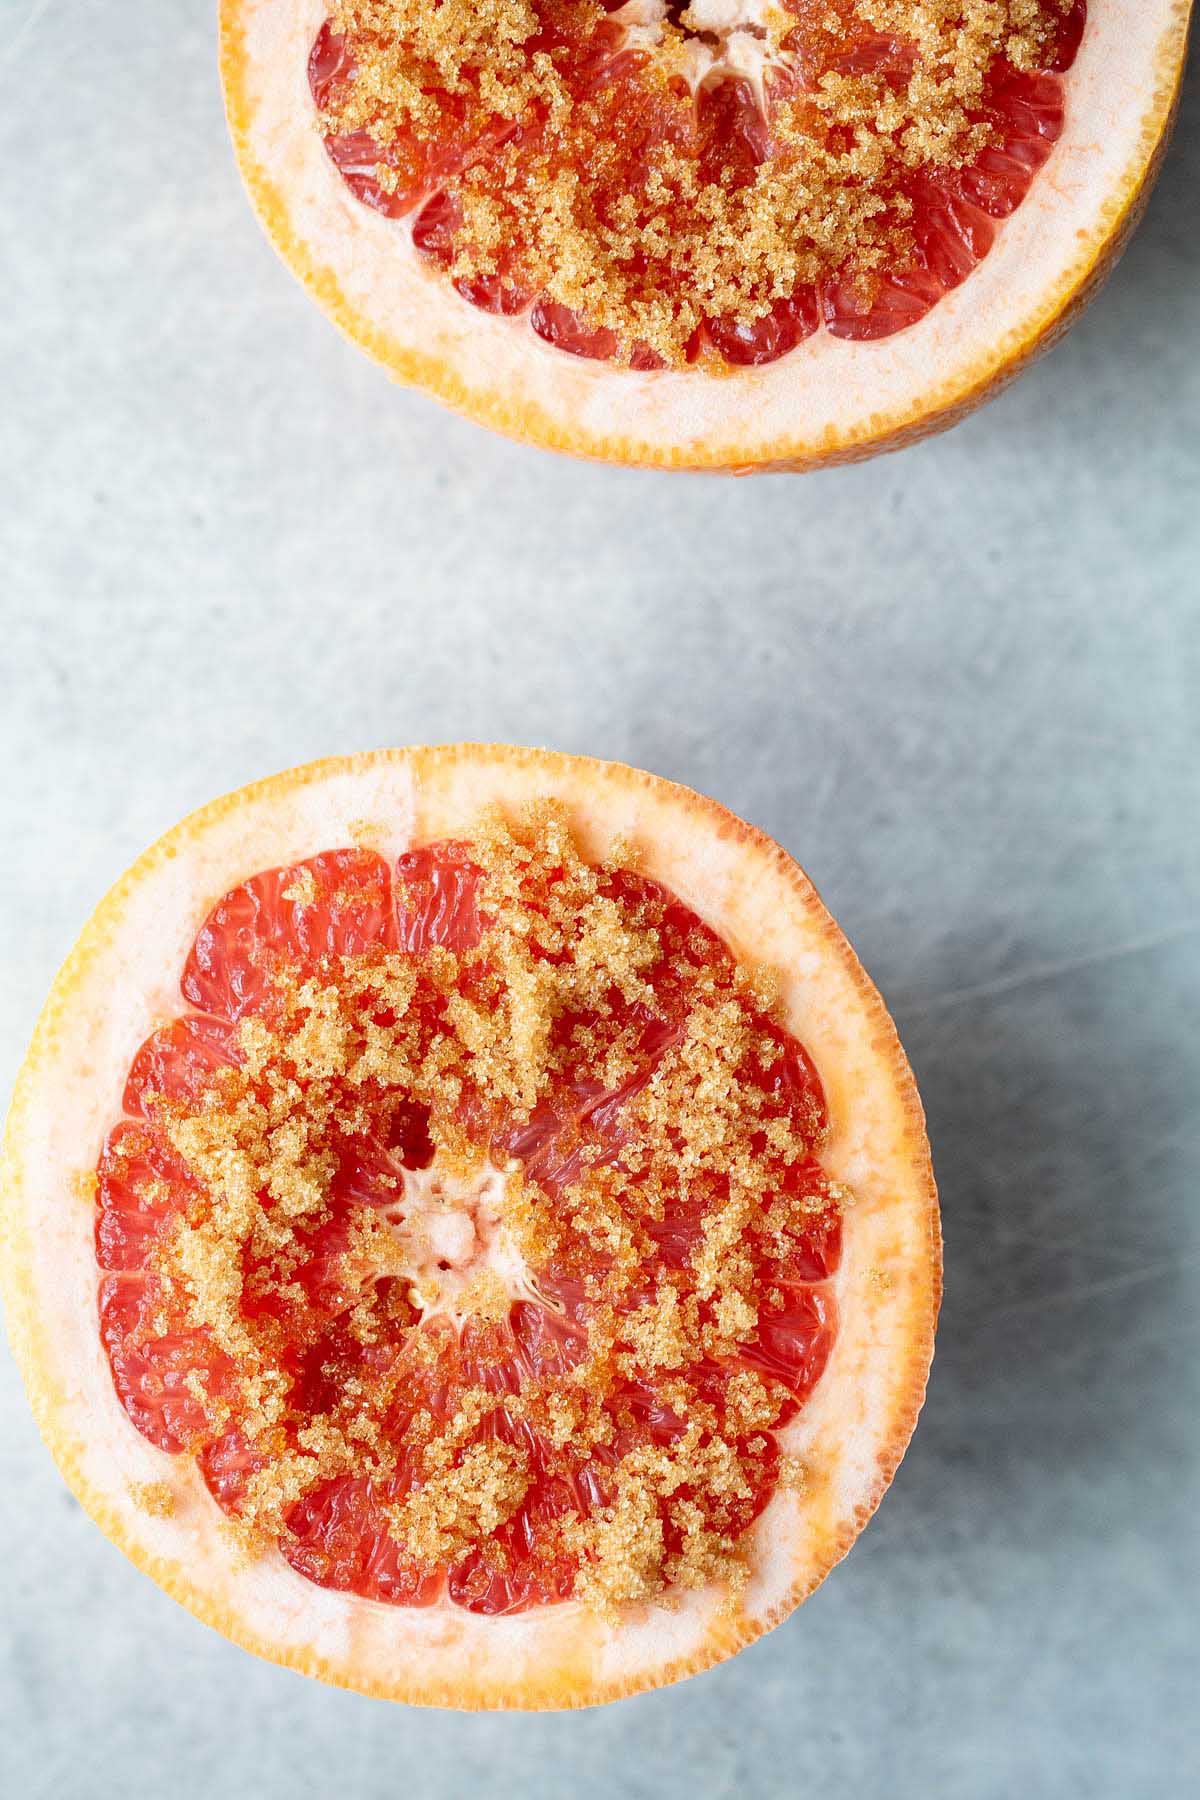 uncooked grapefruit with brown sugar sprinkled on top.